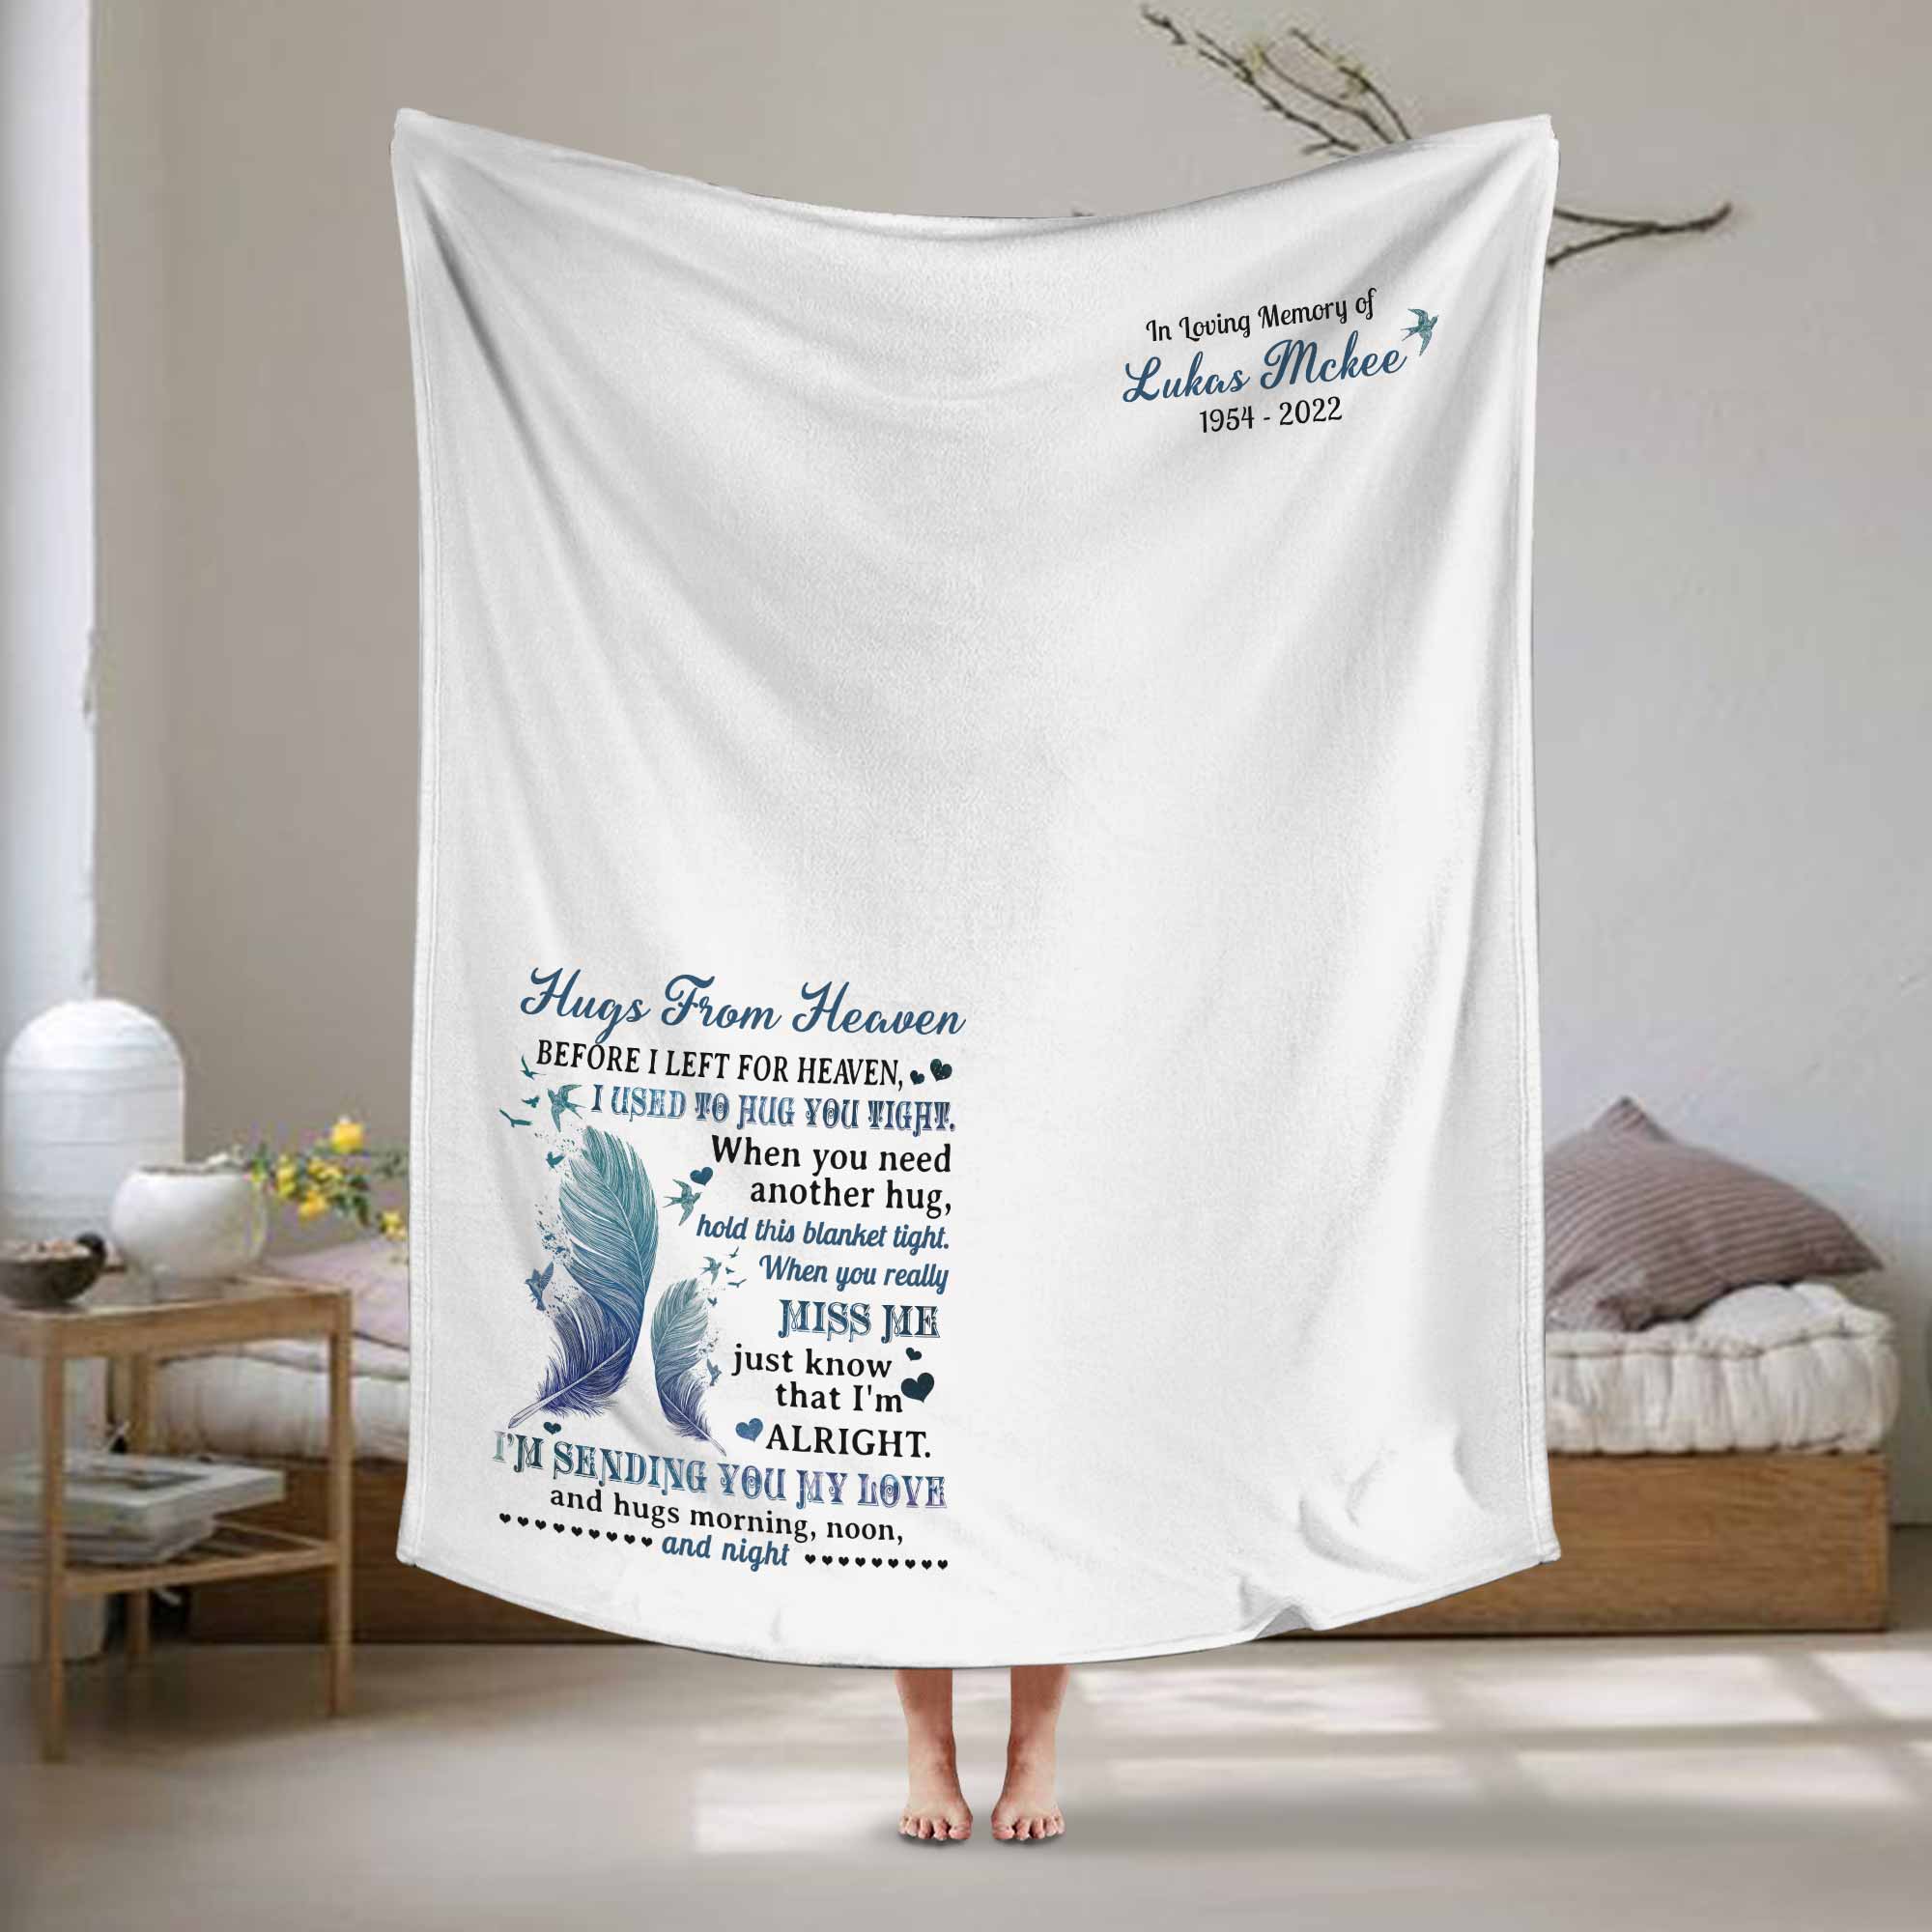 Personalized Memory Blankets, Sympathy Ideas for Loss of Father/Mother, Hugs From Heaven Funeral Blankets